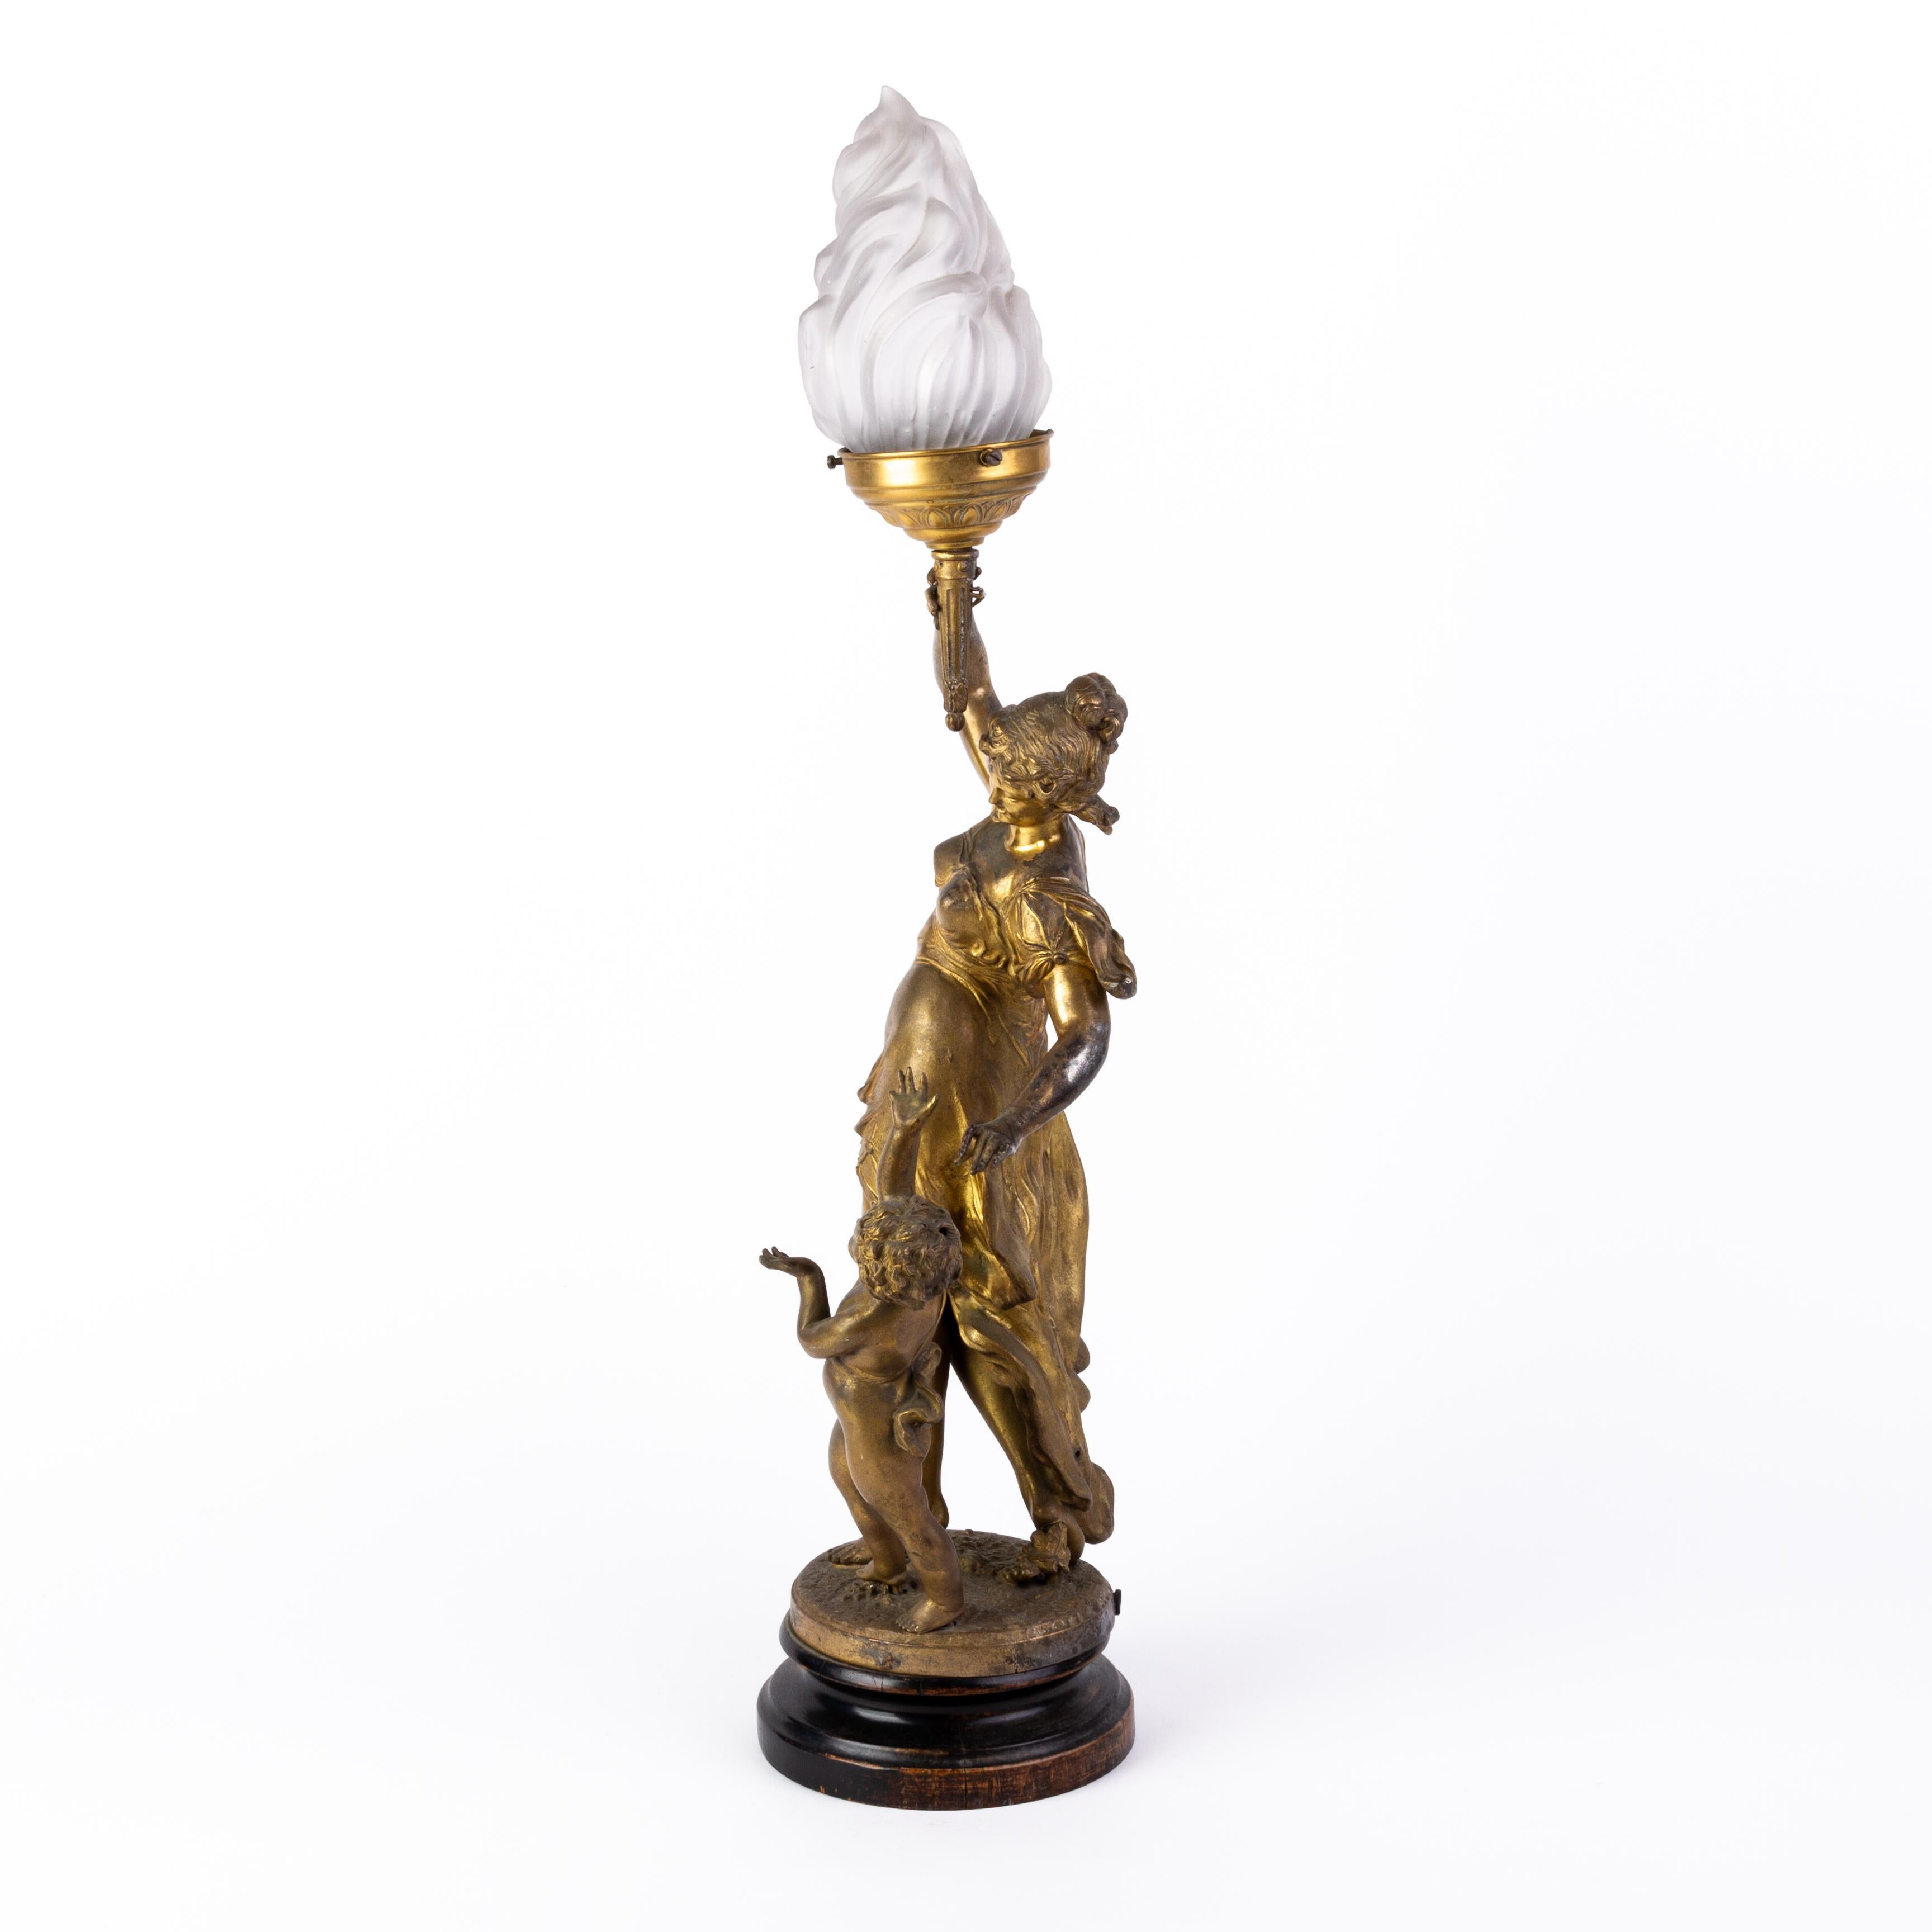 Spelter Ernest Rancoulet (1870-1915) French Sculpture Lamp 19th Century 